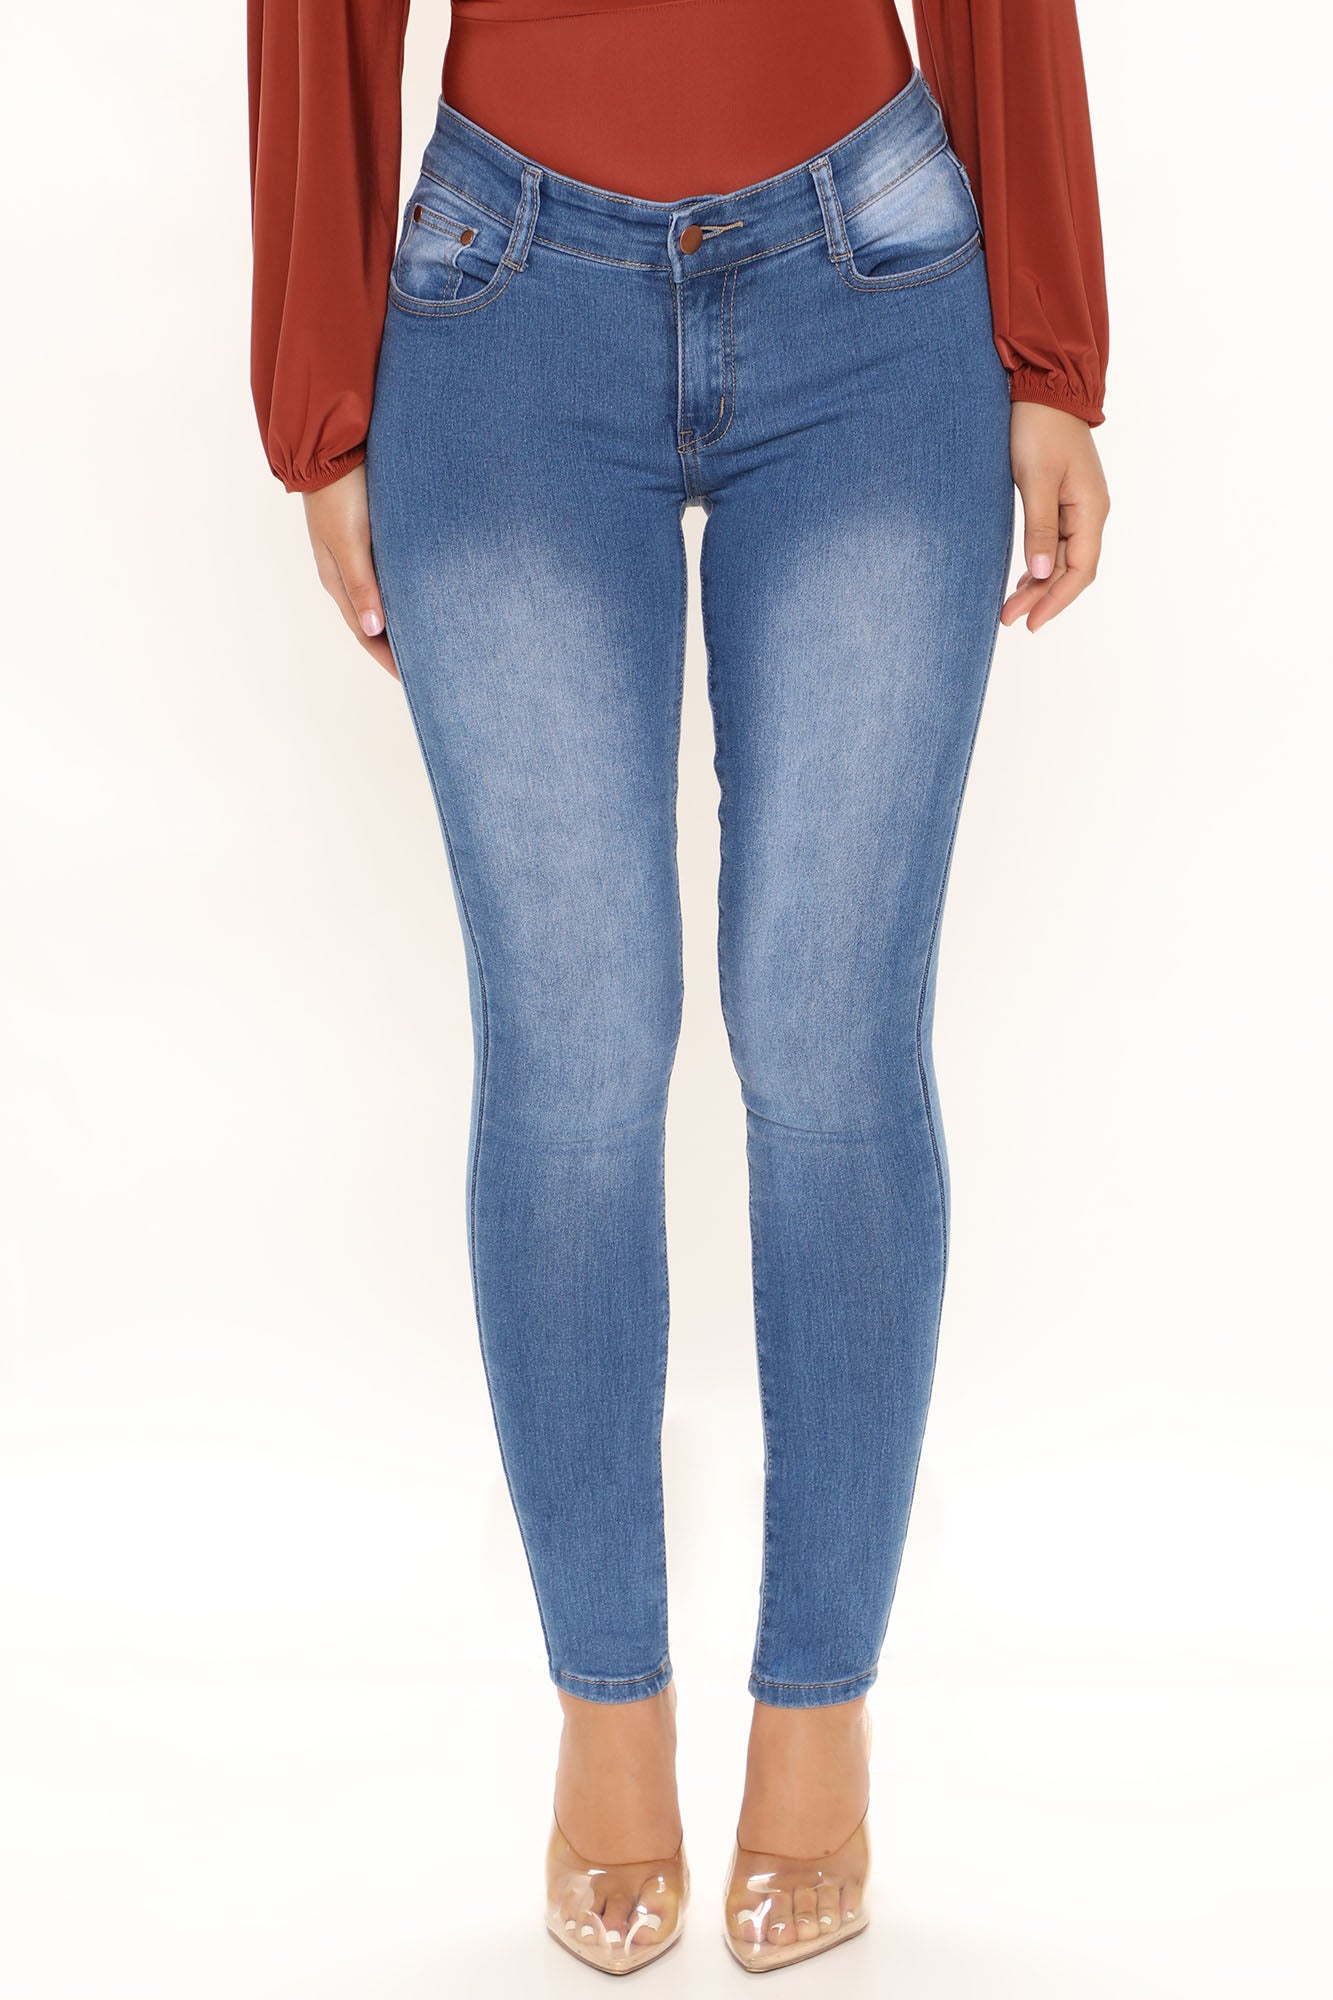 Tall All The Booty Ripped Skinny Jeans - Medium Blue Wash